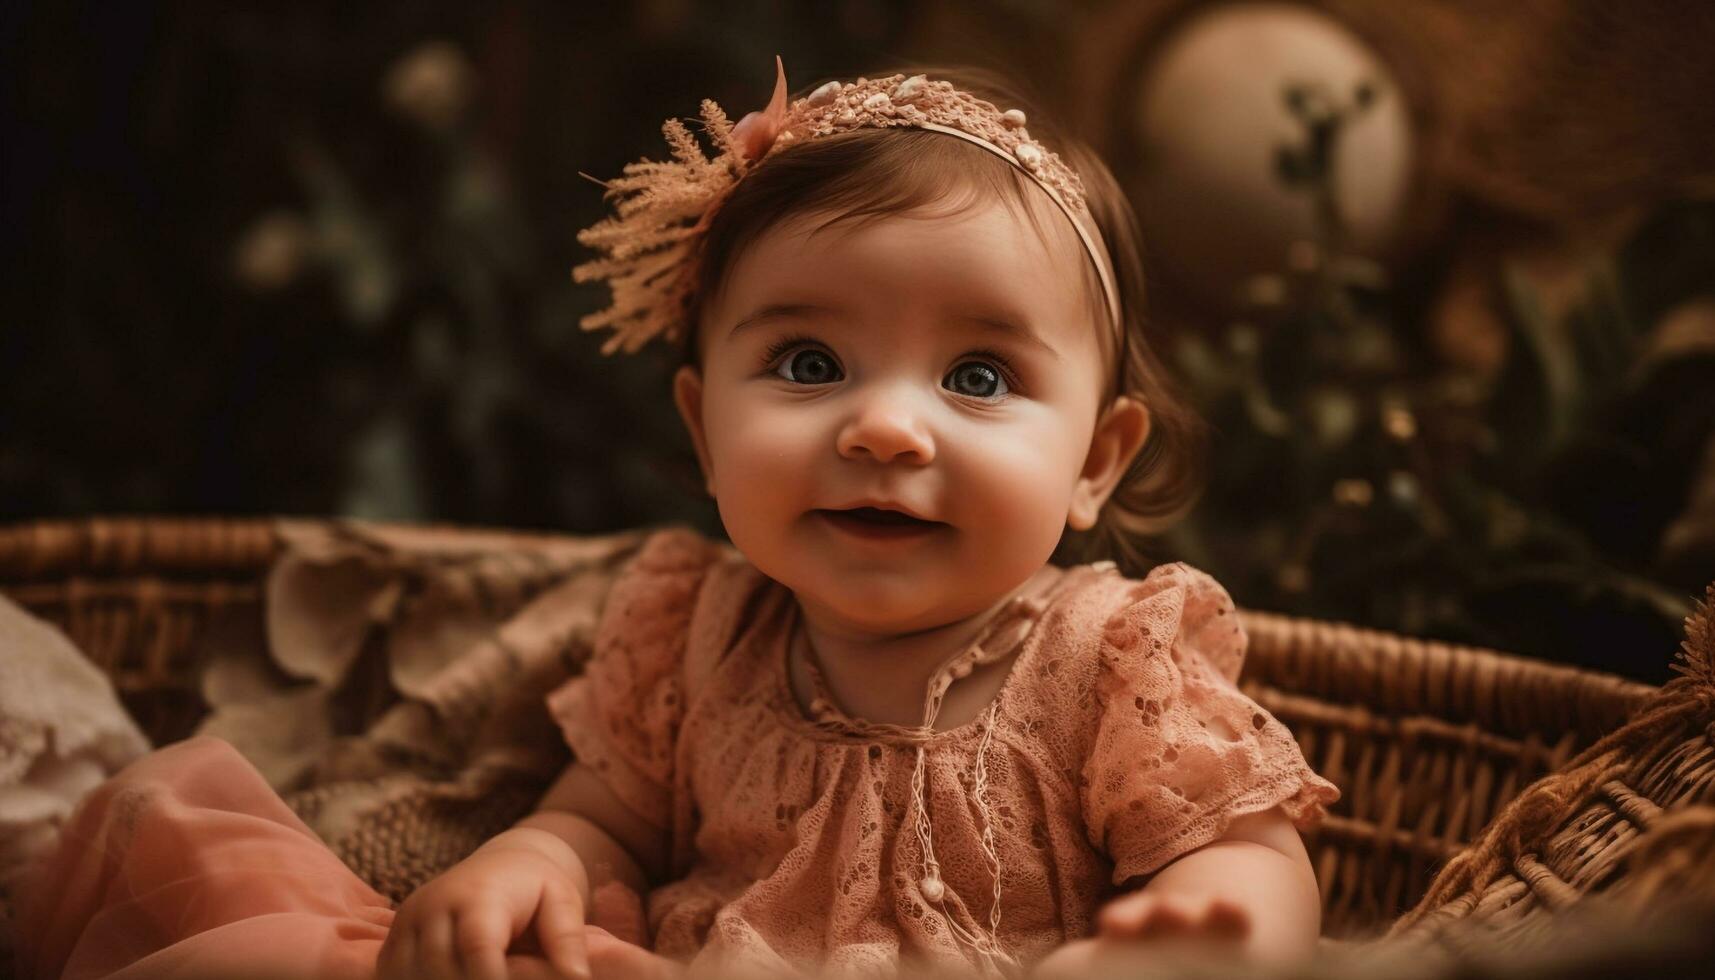 Cute baby girl smiling, full of happiness and innocence outdoors generated by AI photo